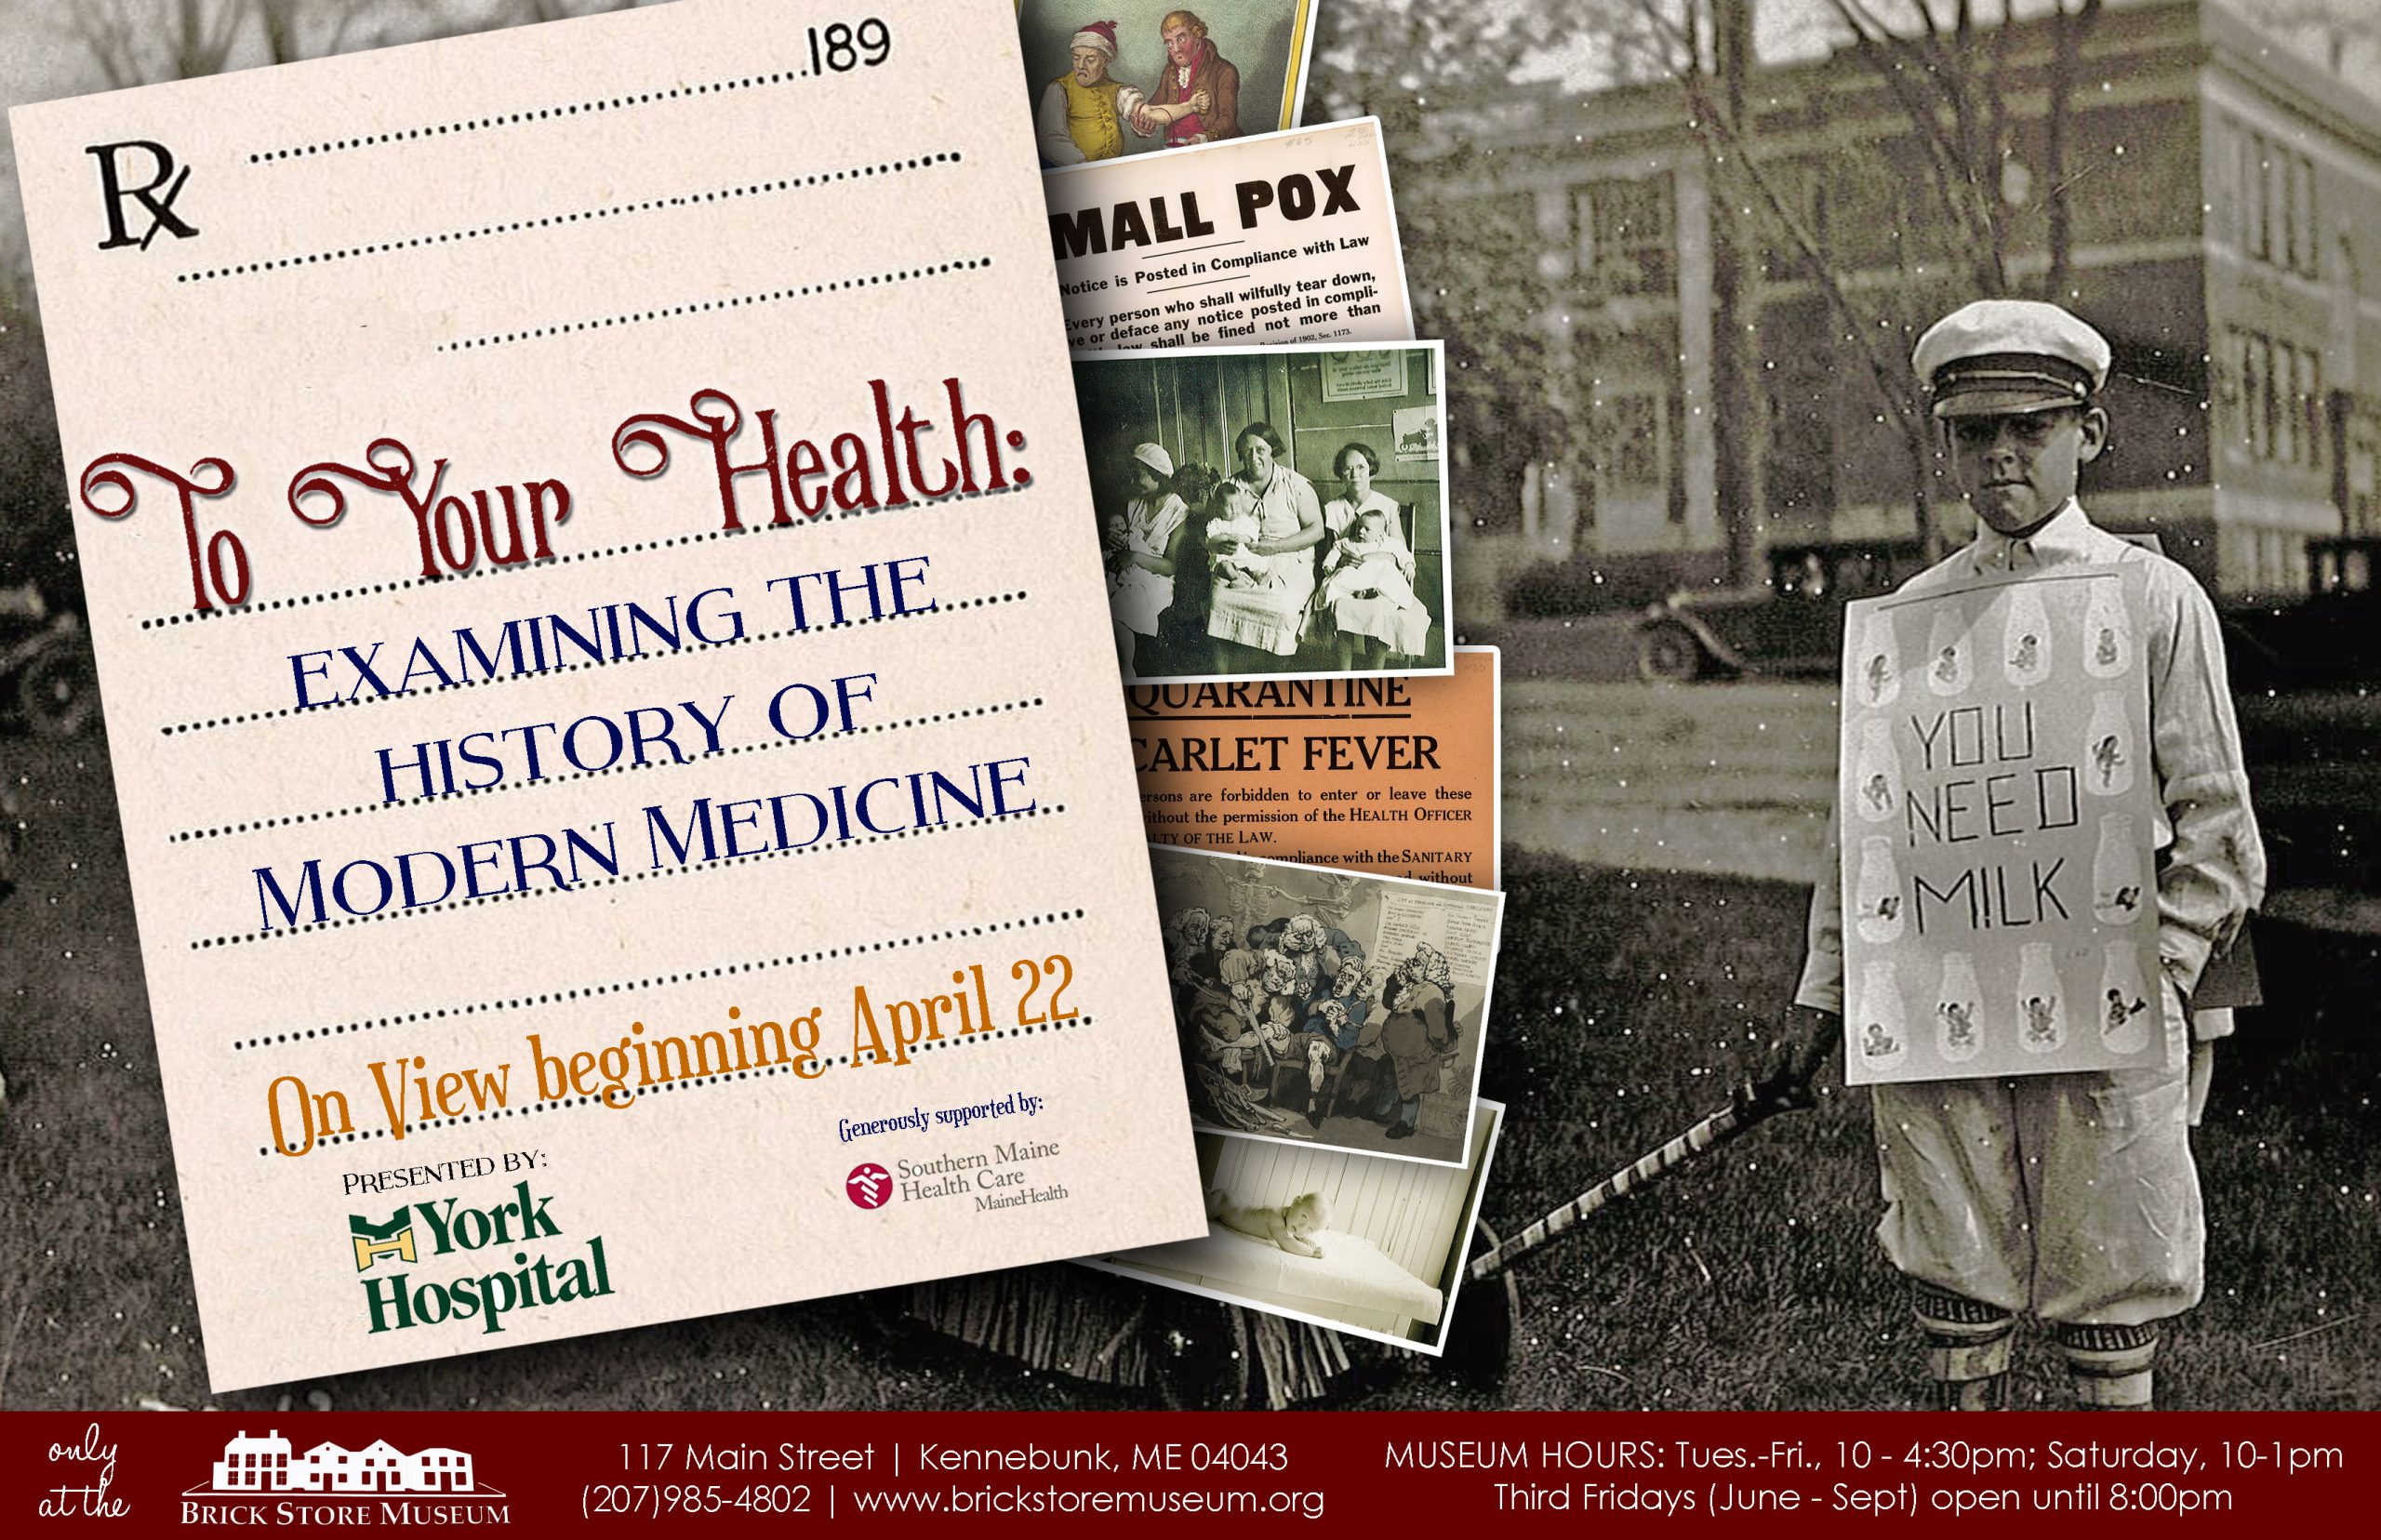 To Your Health: Examining the History of Modern Medicine